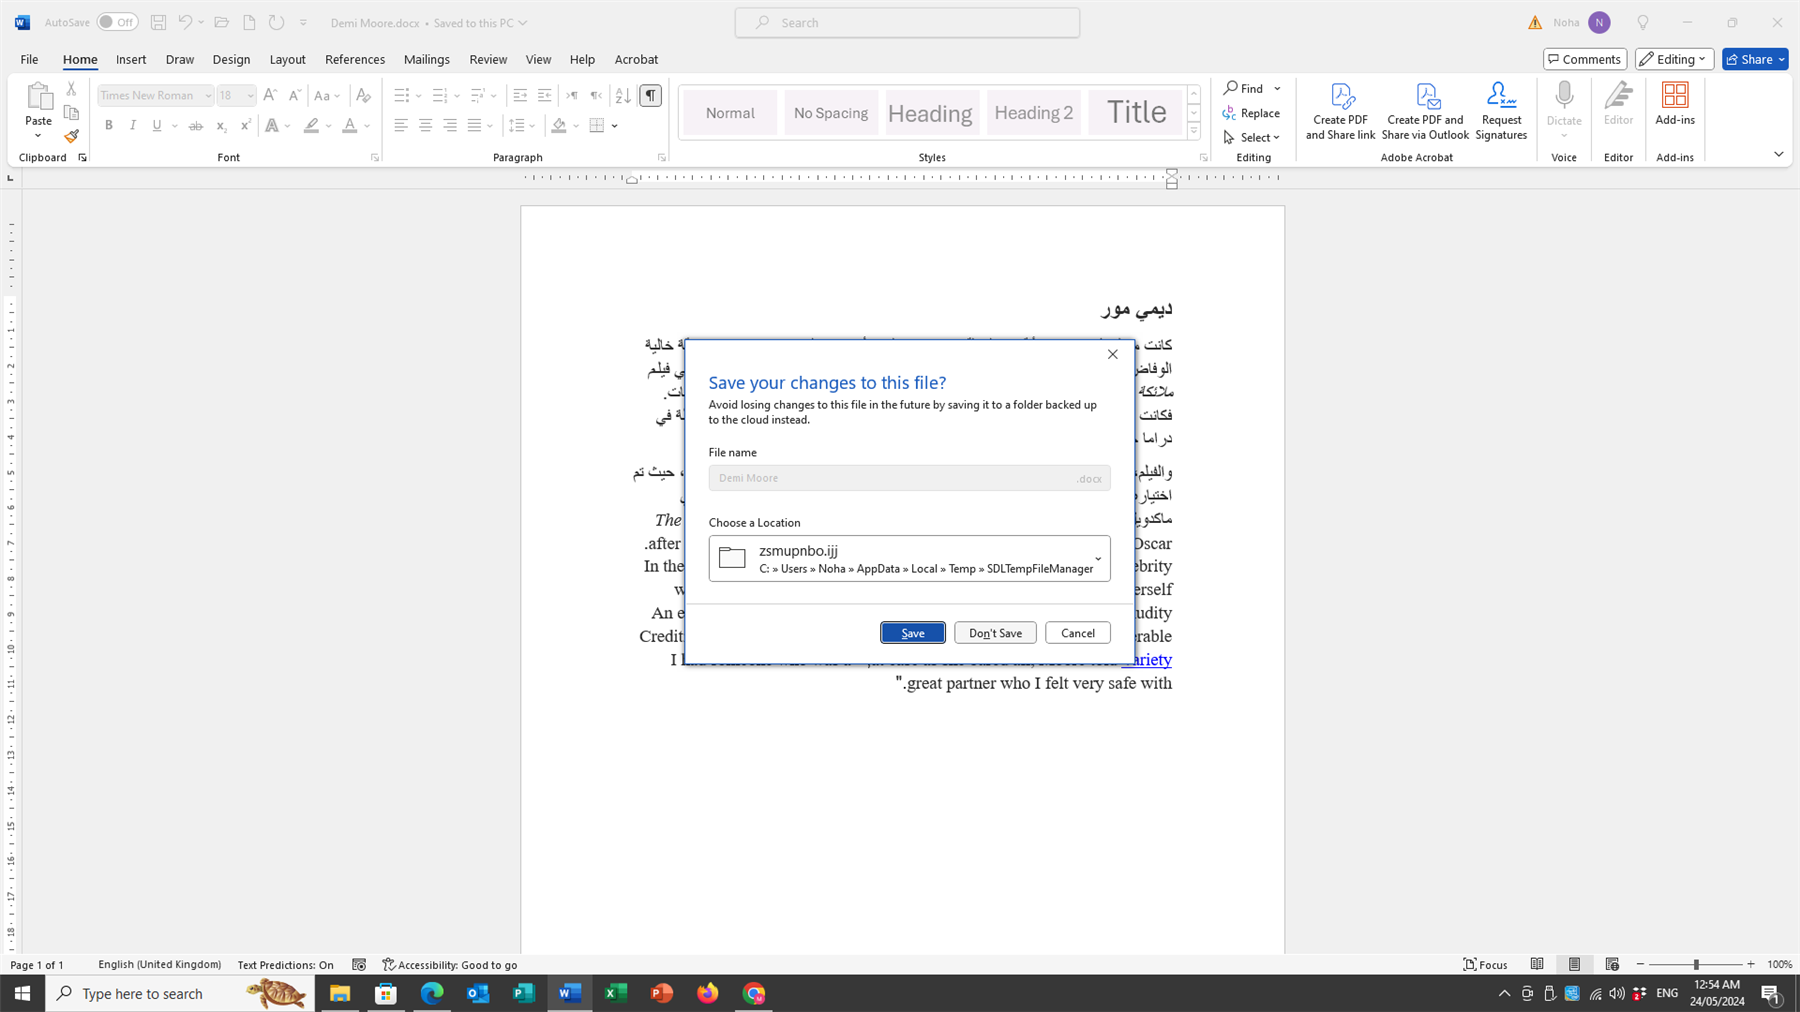 Screenshot of a Microsoft Word document save dialog box. The dialog box is prompting to save changes to the file with the name 'Demi Moore.doc' and shows a temporary file path.